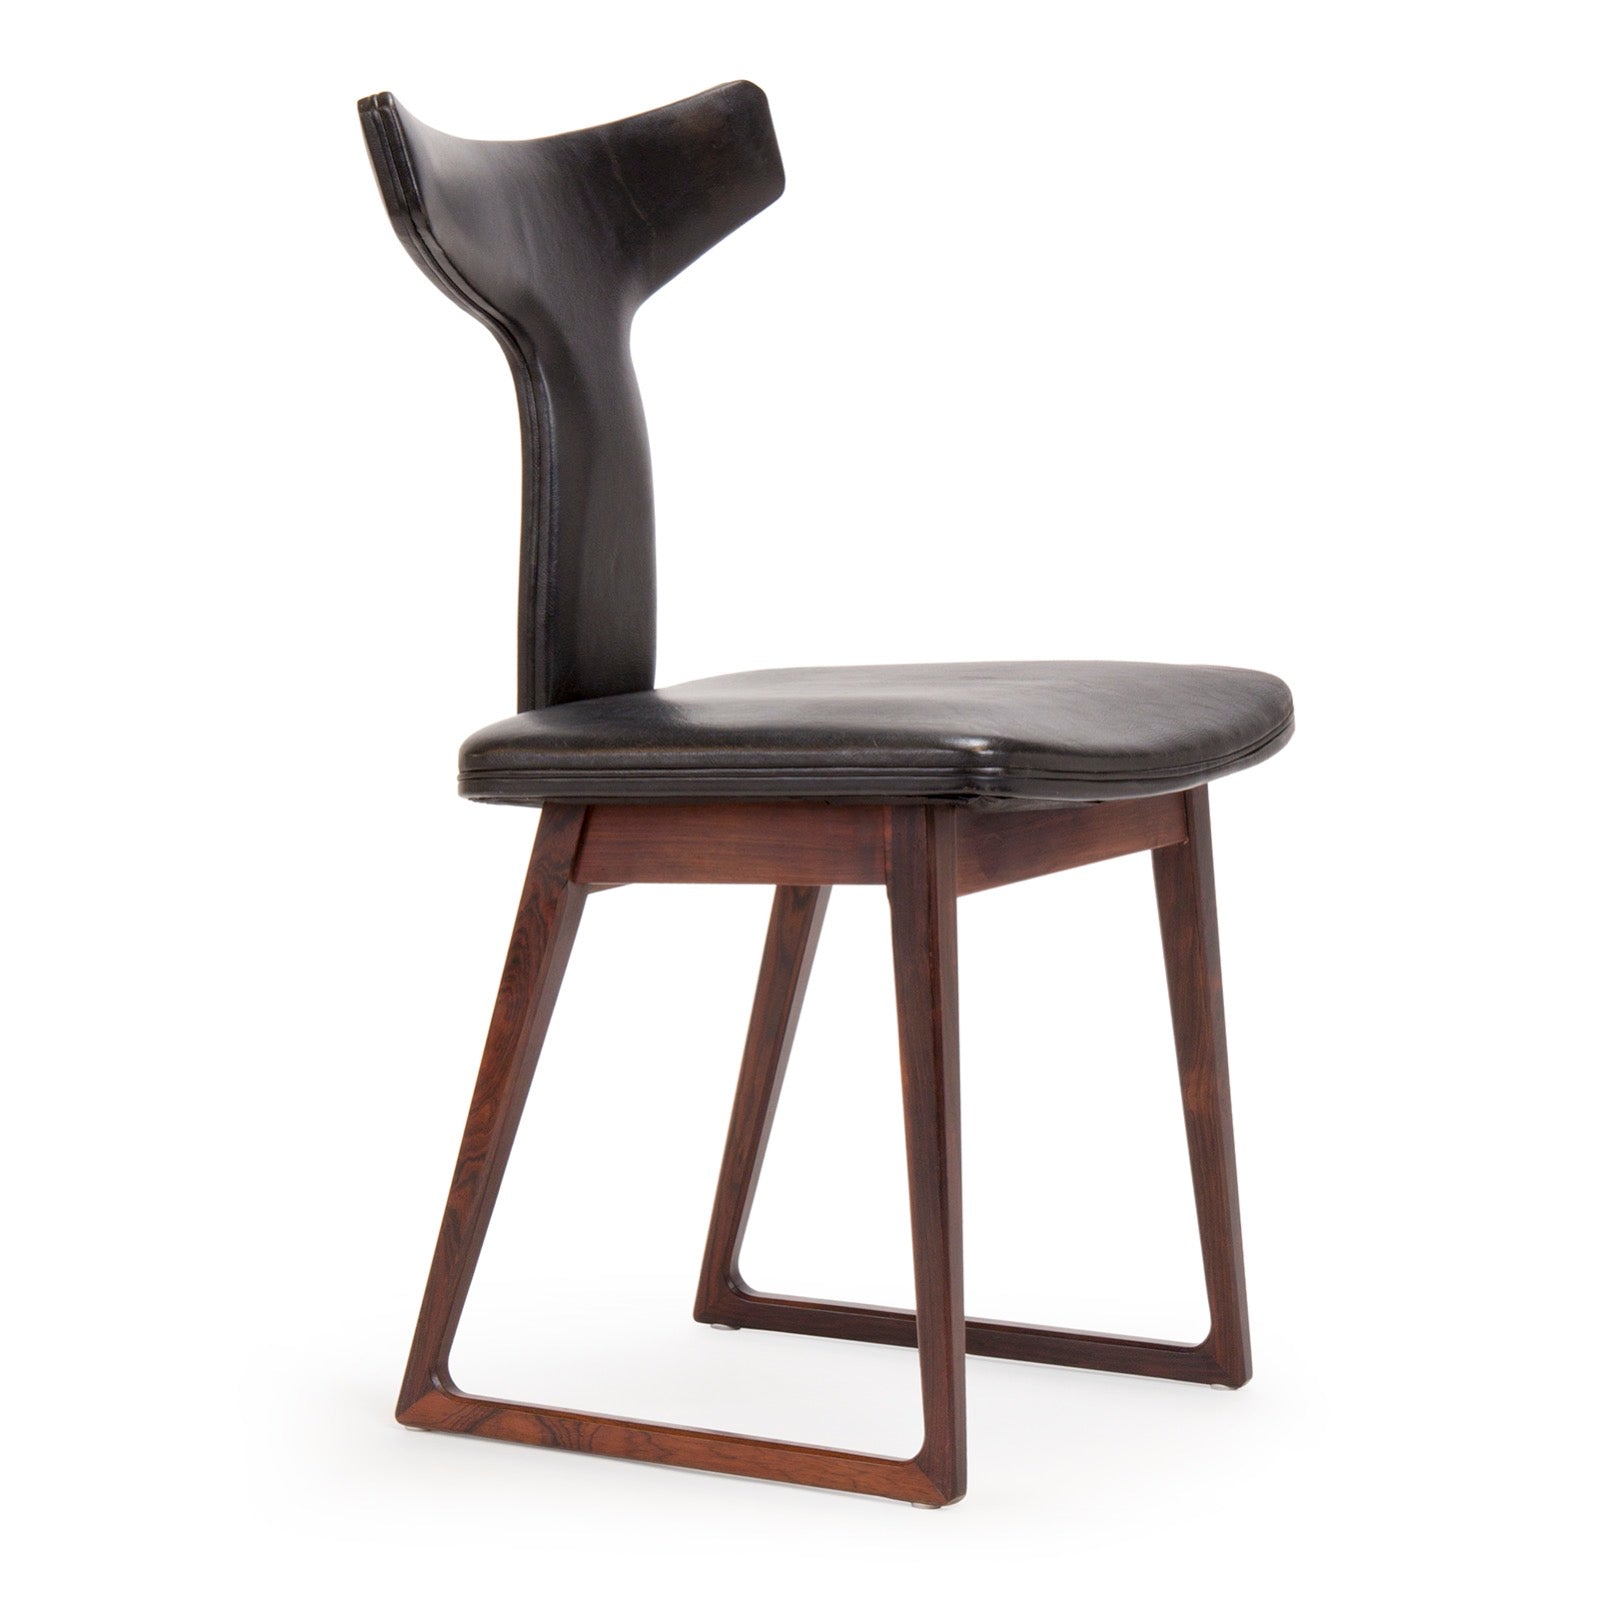 T-Shaped Back Rosewood Chair by Arne Vodder for Sibast Furniture, 1960s